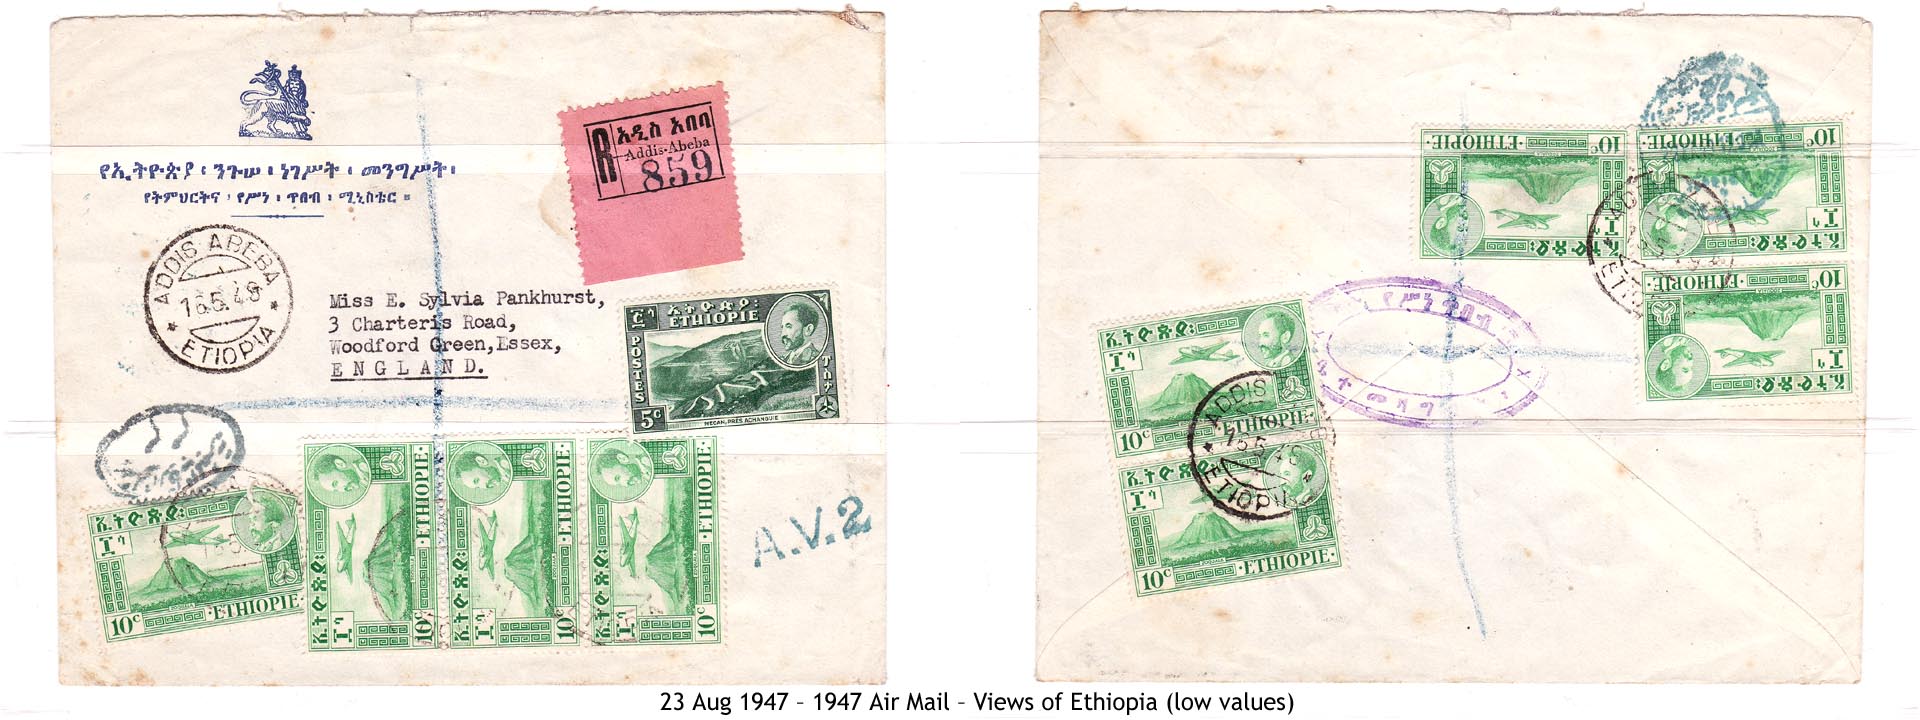 19470823 – 1947 Air Mail – Views of Ethiopia (low values)